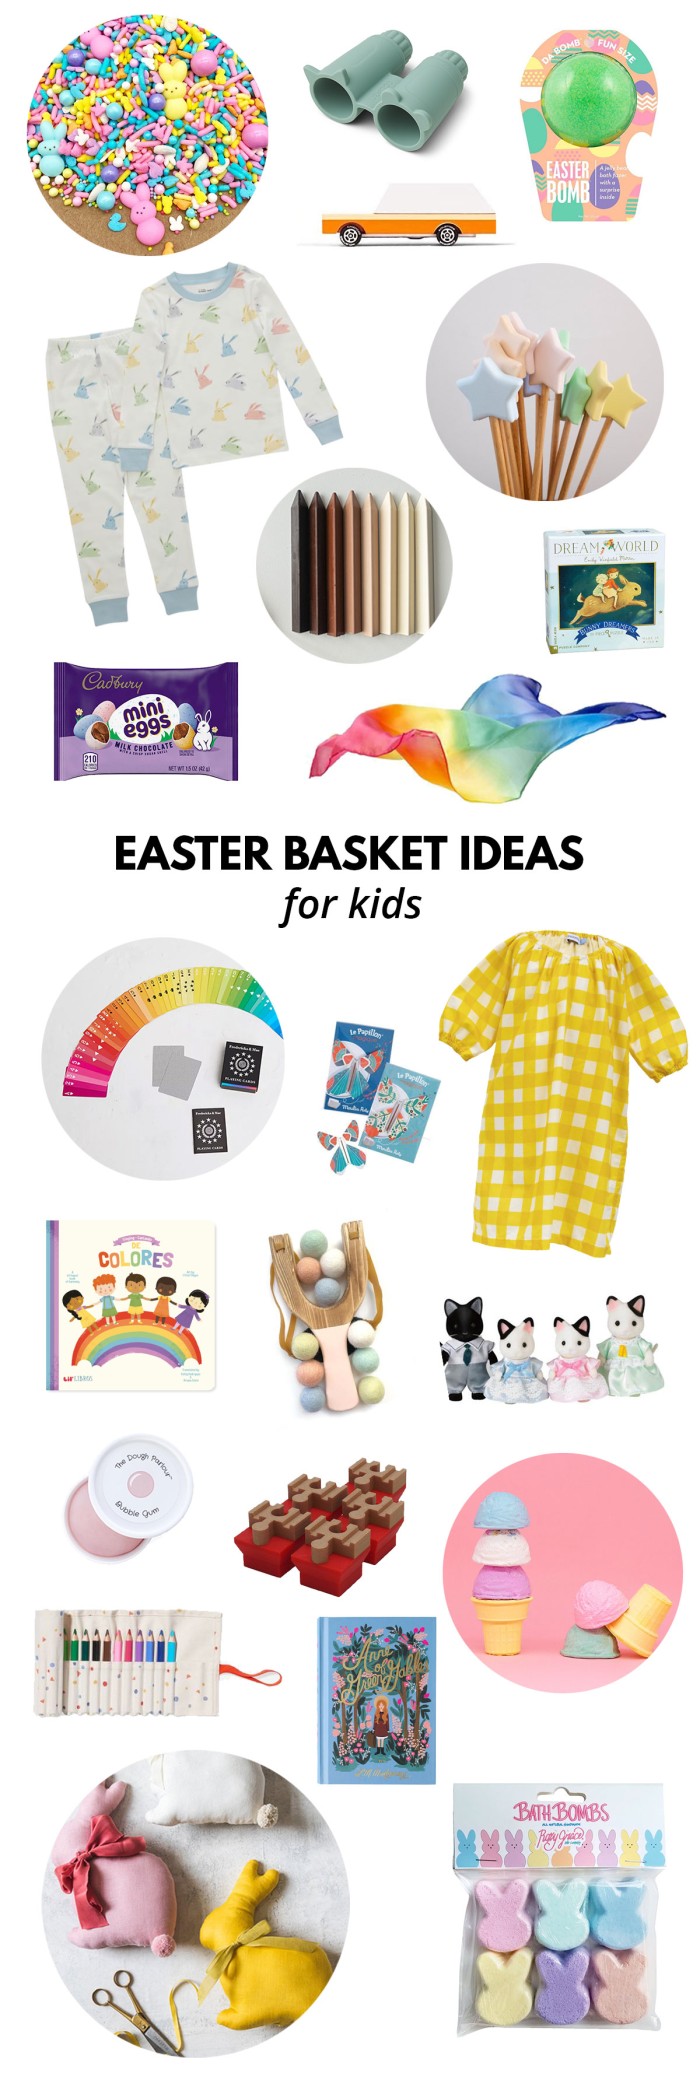 collage of Easter basket ideas for kids